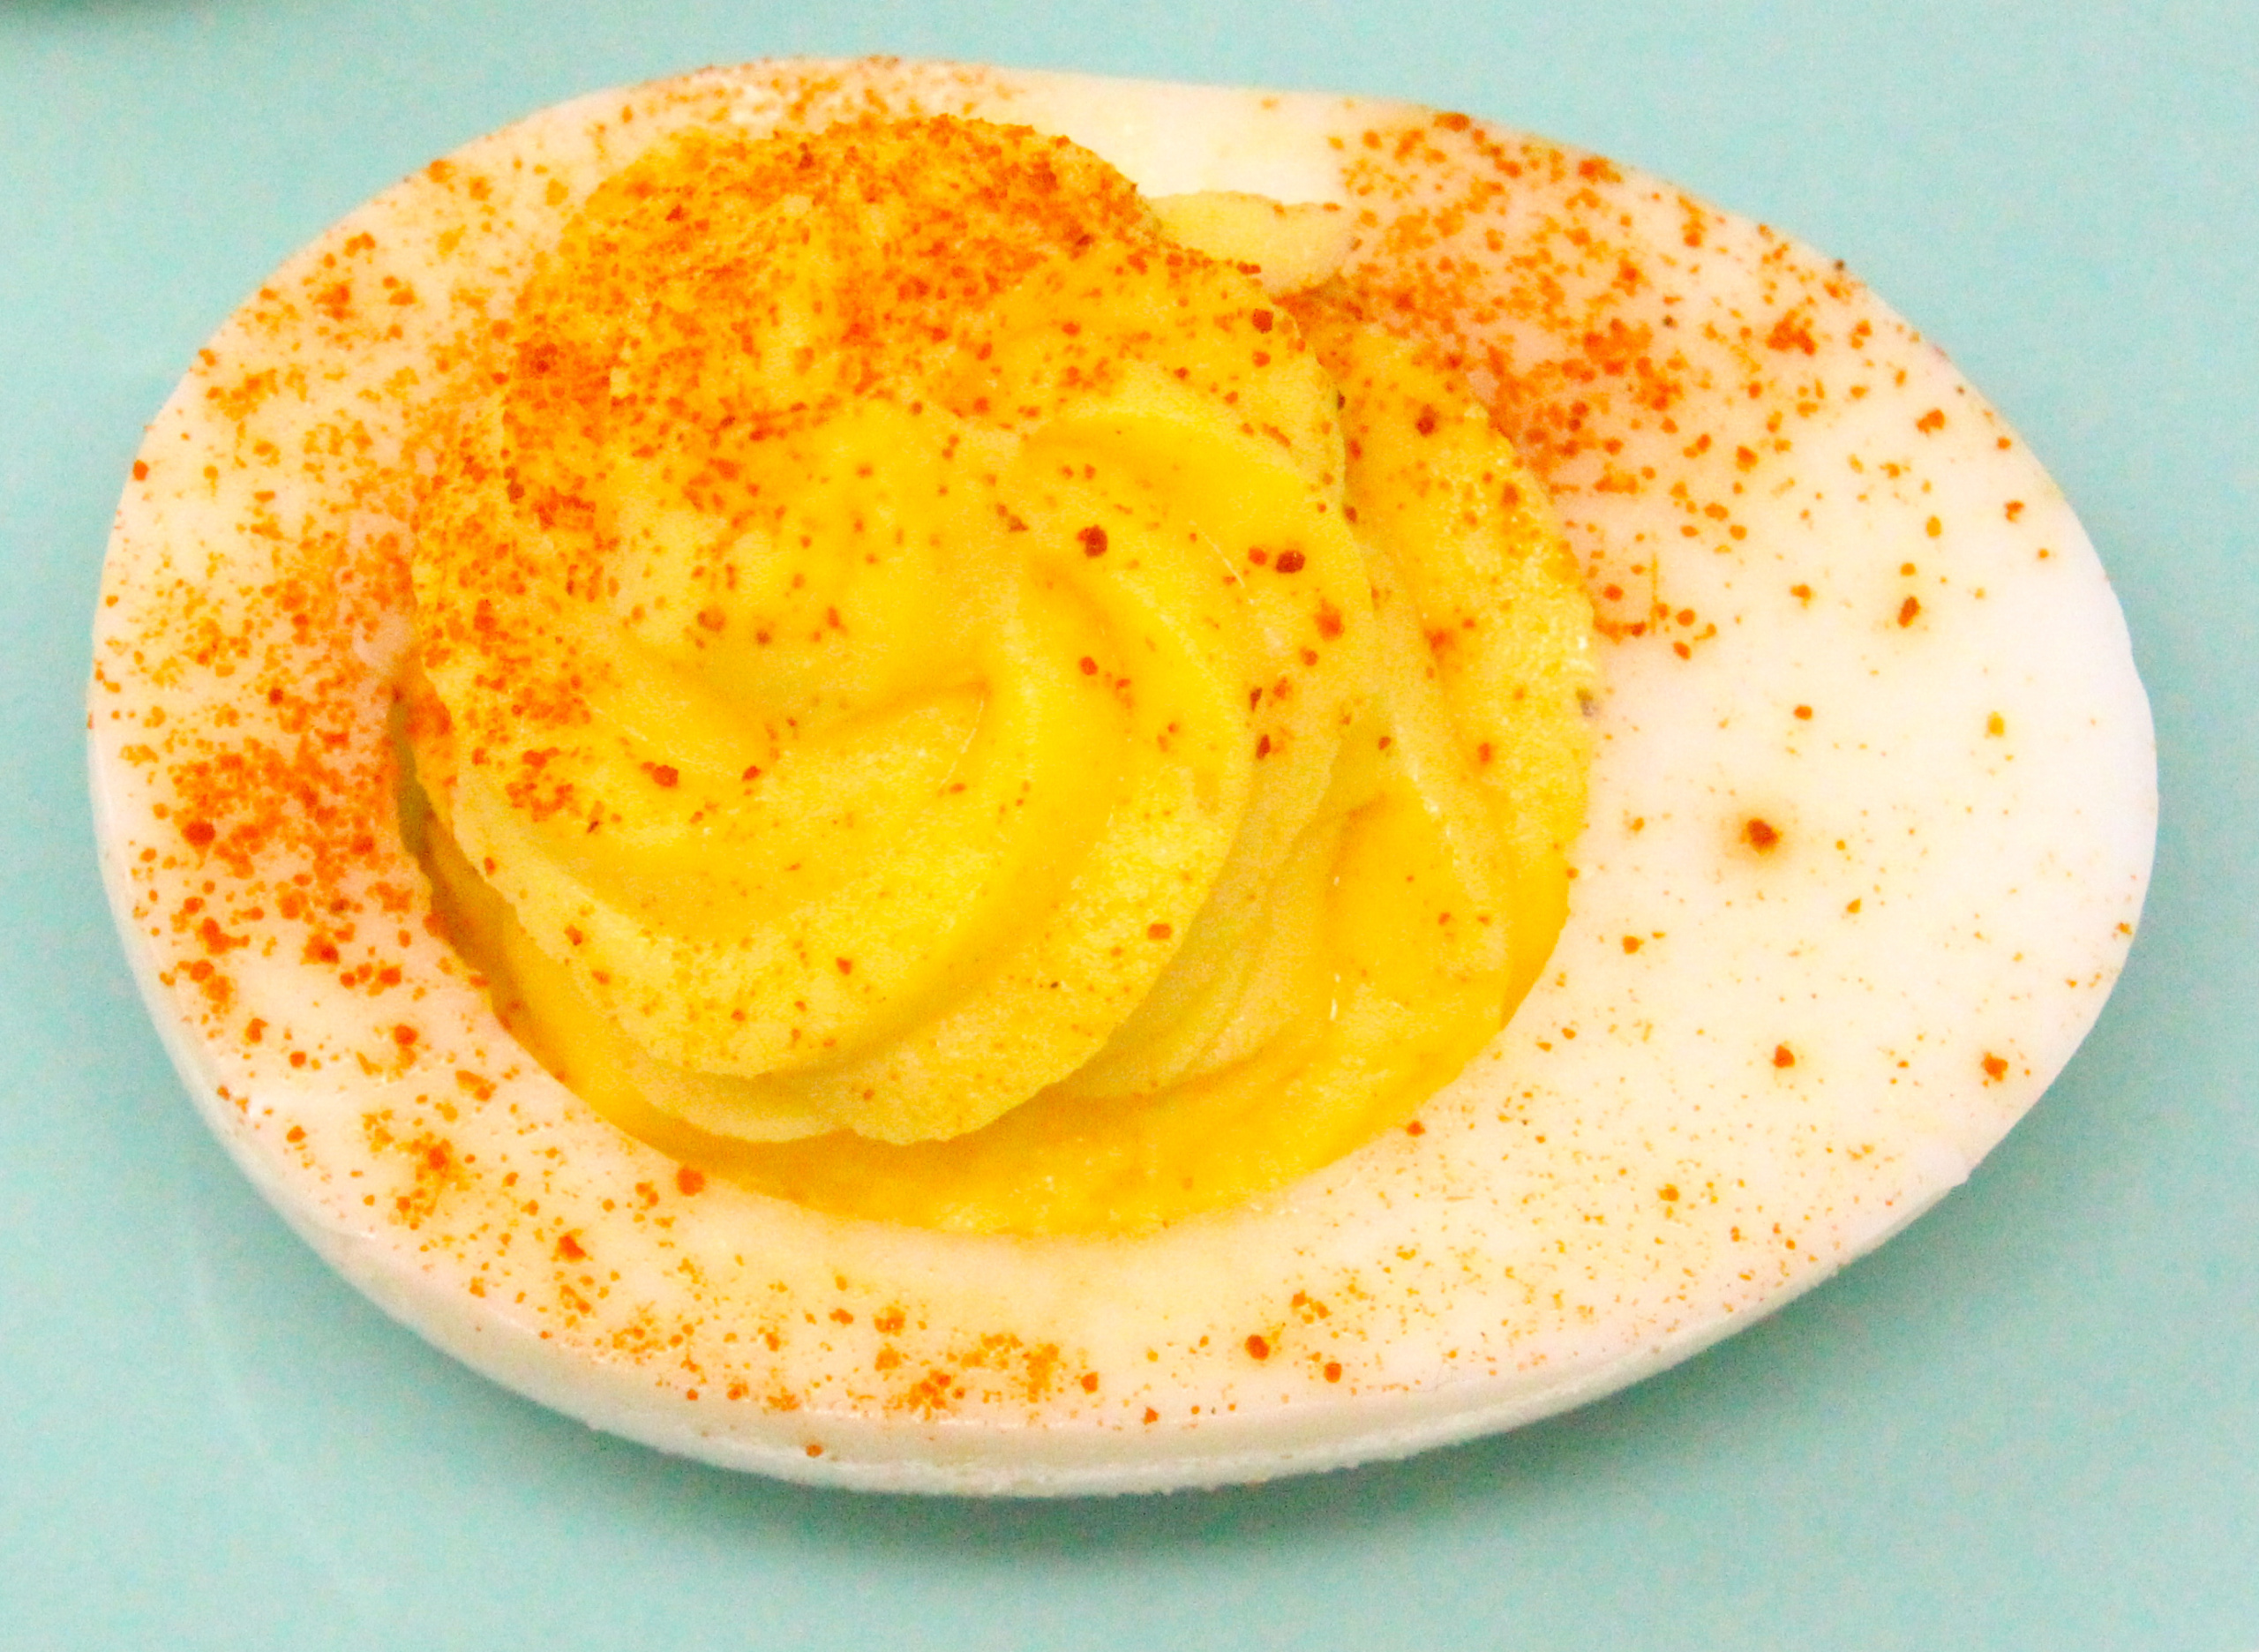 This recipe makes it easy to perfectly cook and season deviled eggs without any guessing. Everyone will love these rich and creamy appetizers! Recipe shared with permission granted by Krista Davis, author of THE DOG ACROSS THE LAKE. 